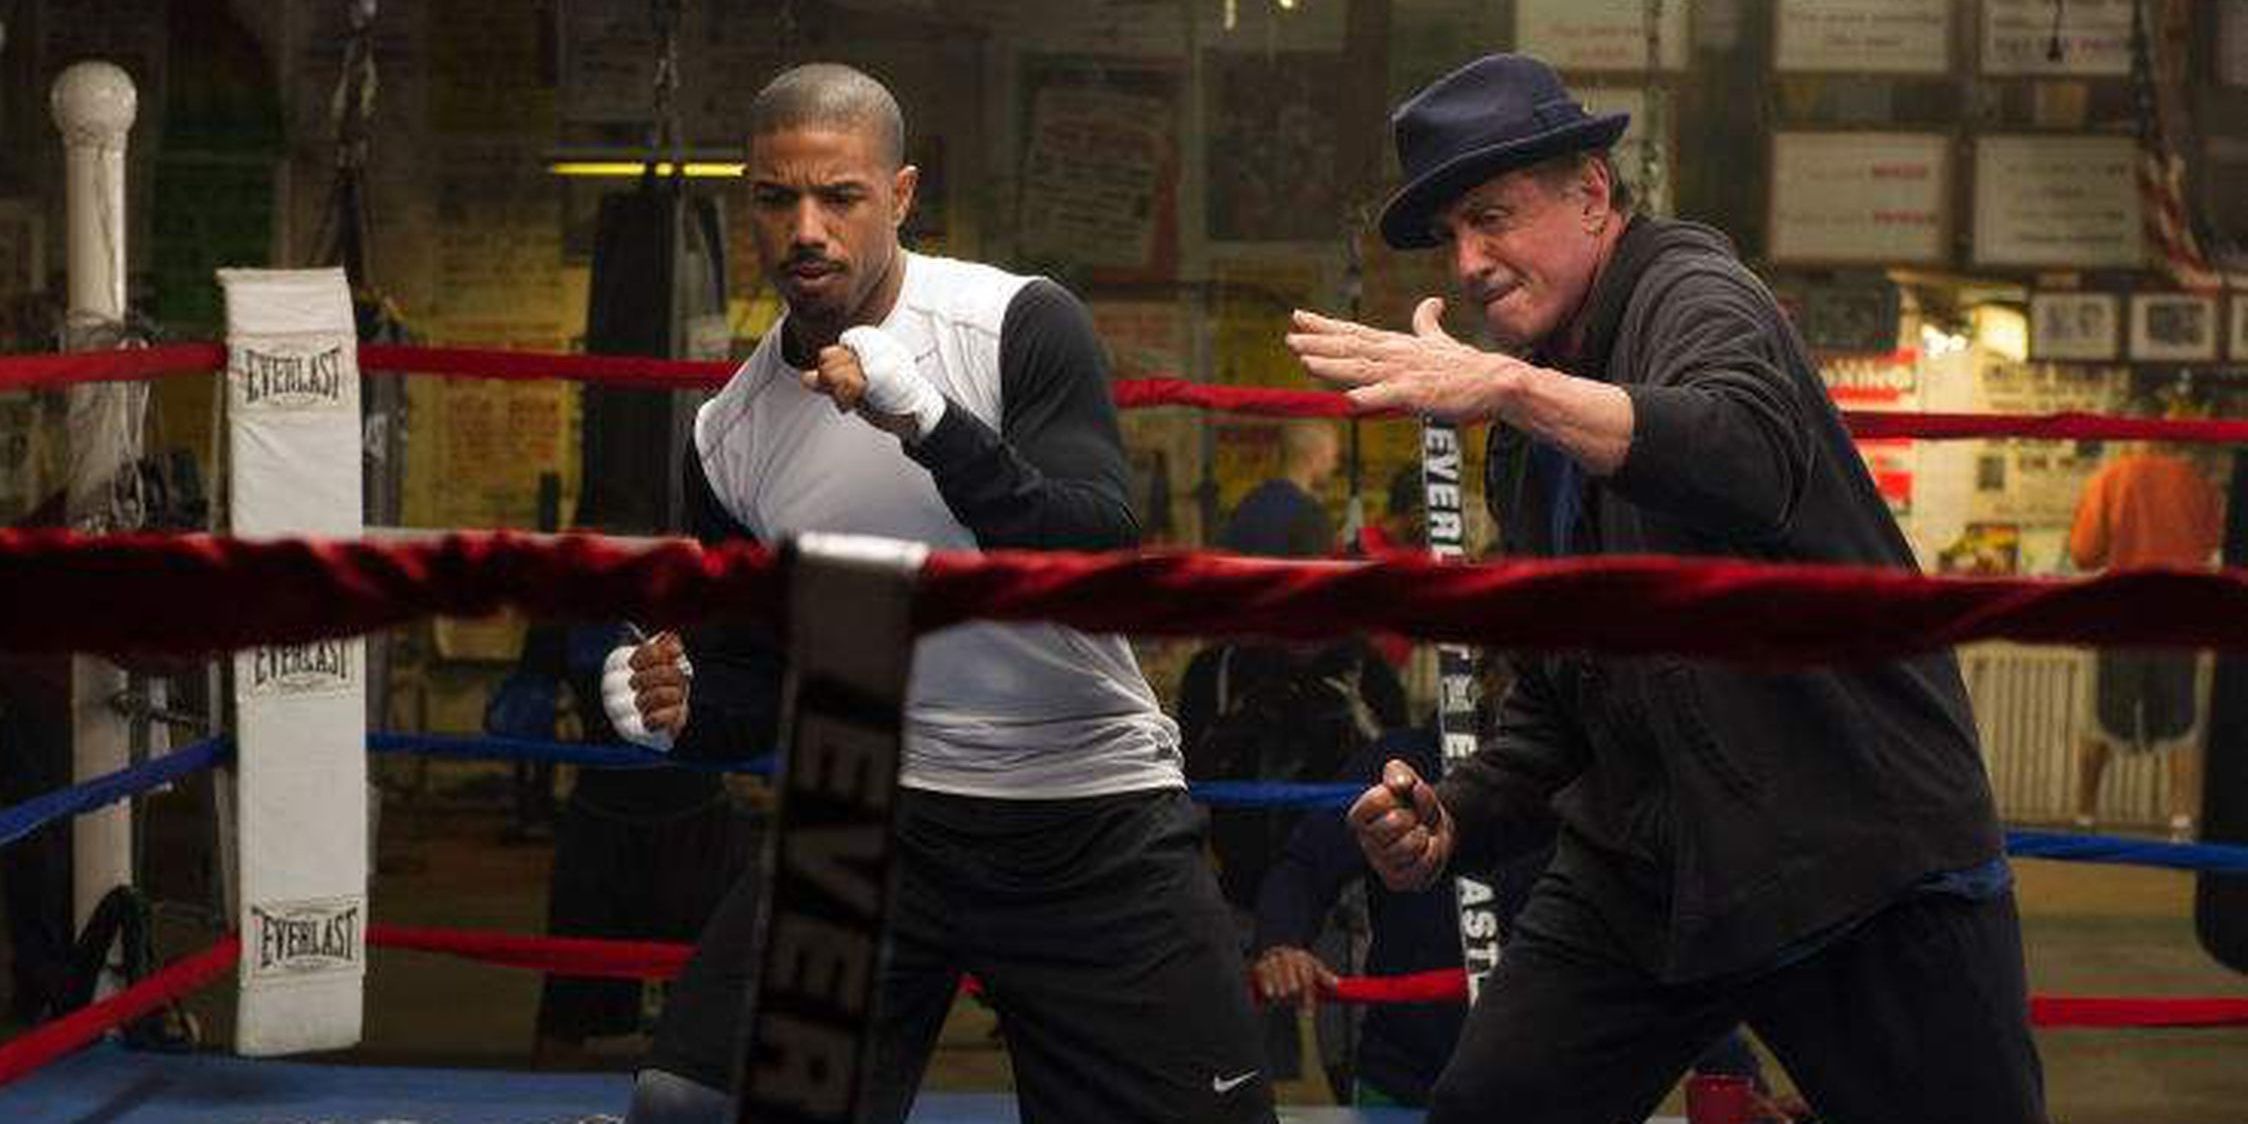 MOVIES TO BINGE ON A DAY OFF ROCKY CREED